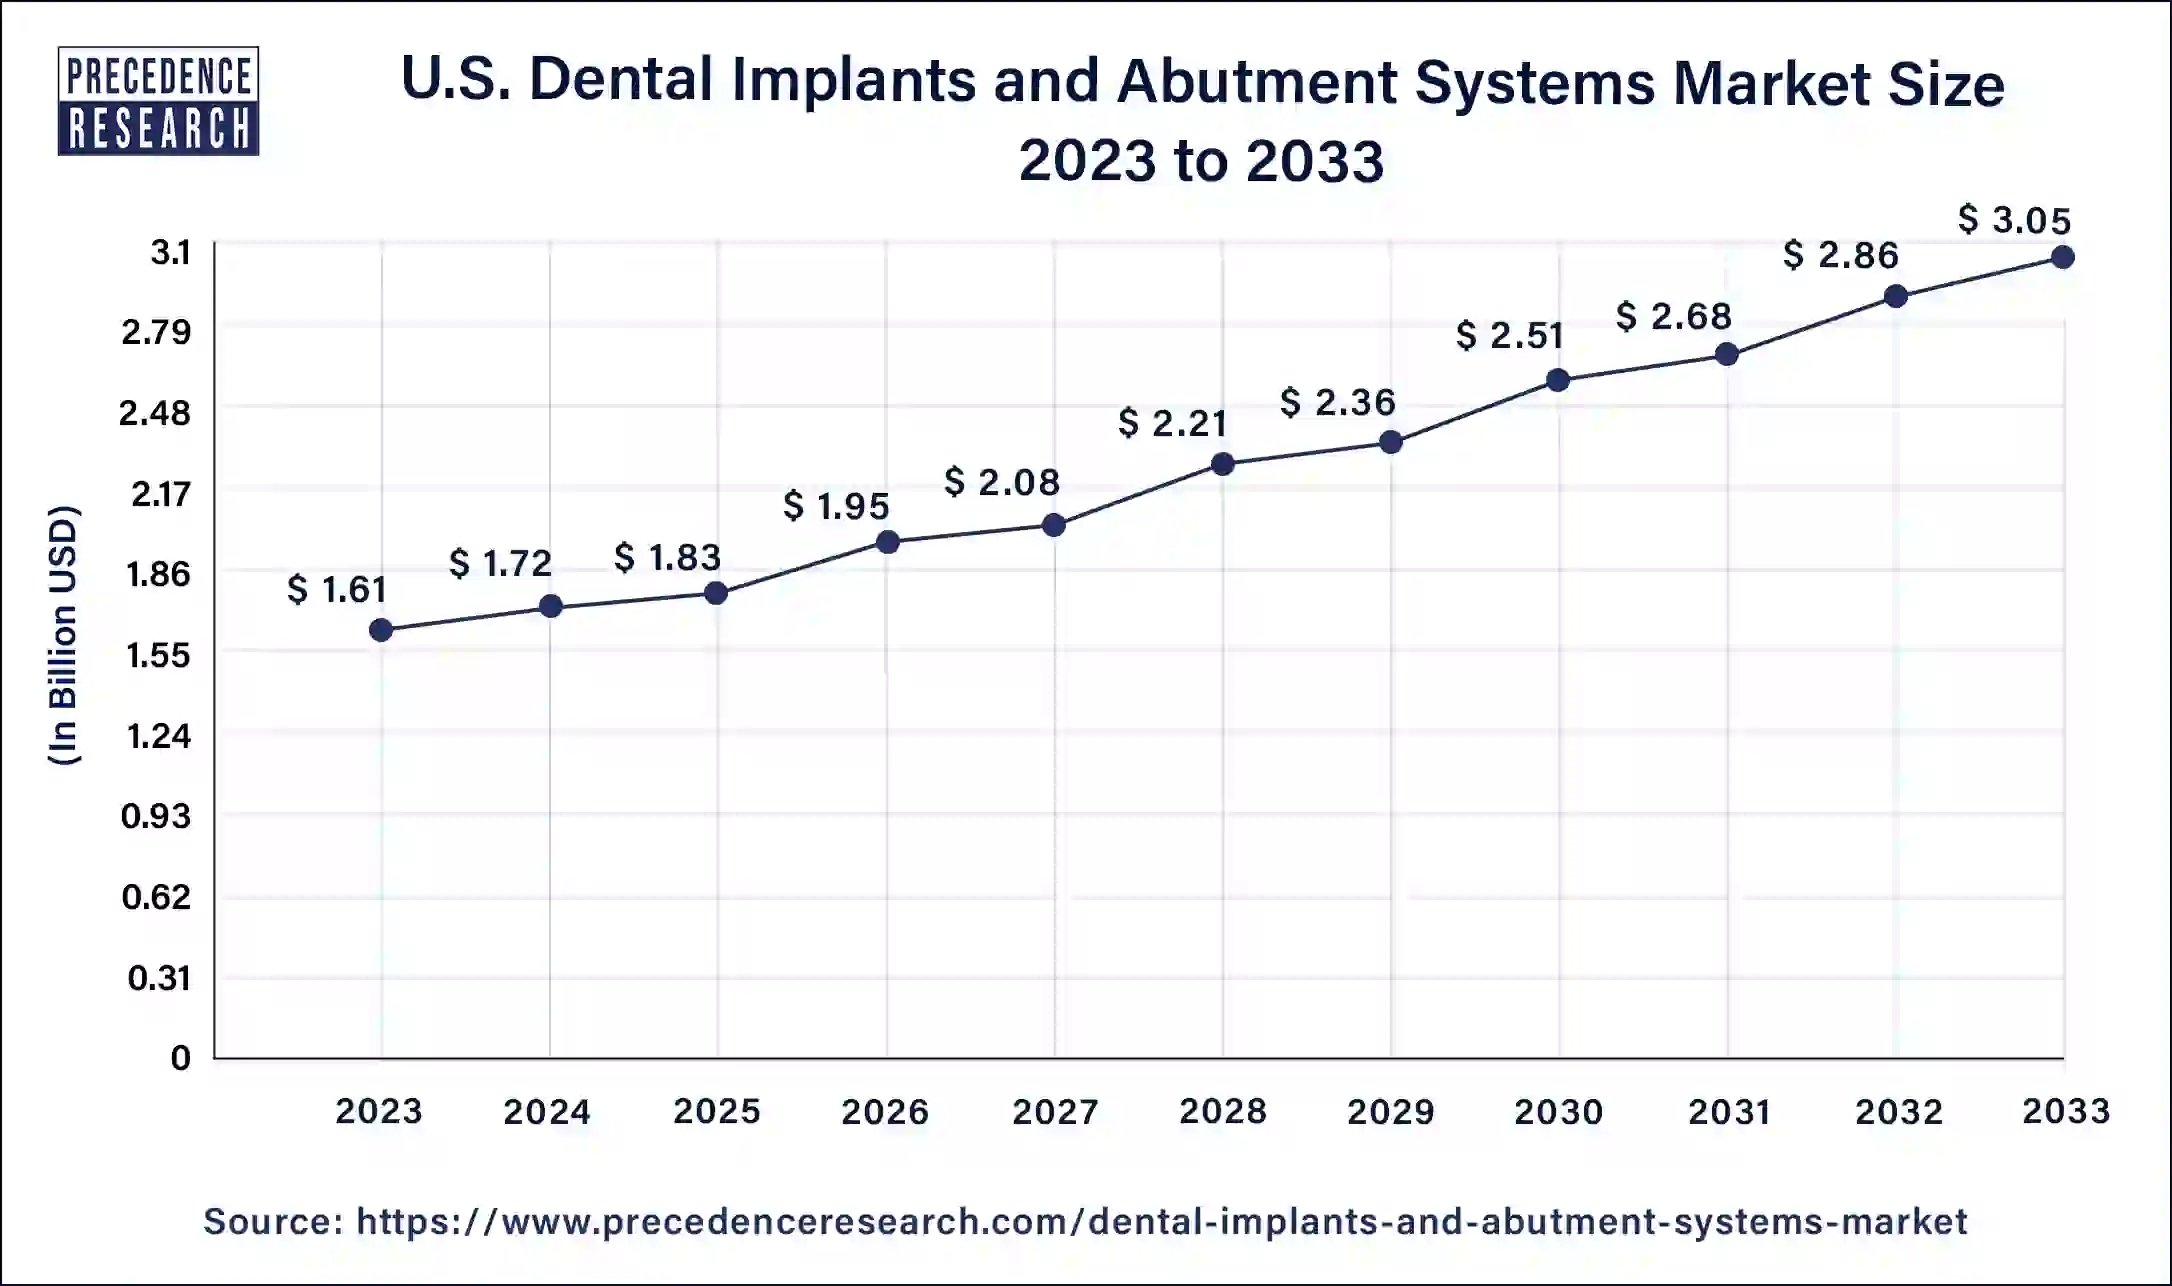 U.S. Dental Implants and Abutment Systems Market Size 2024 to 2033